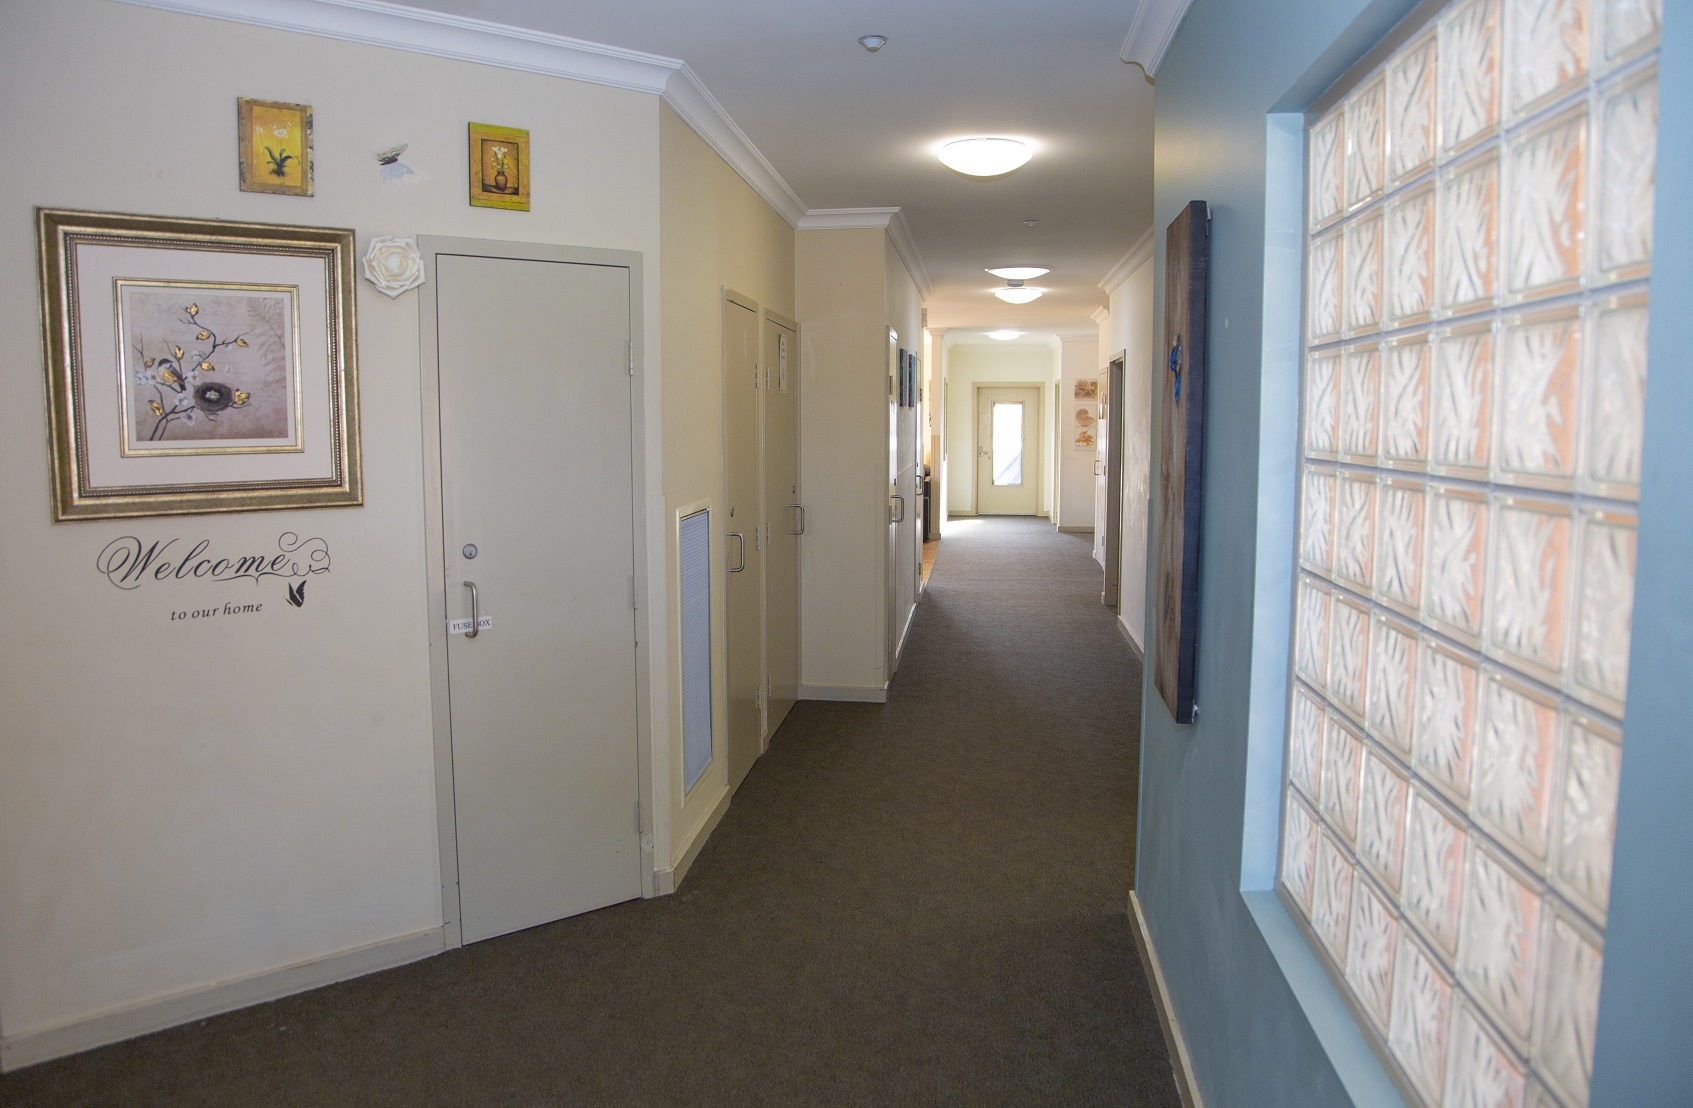 Hallway area with pictures on walls